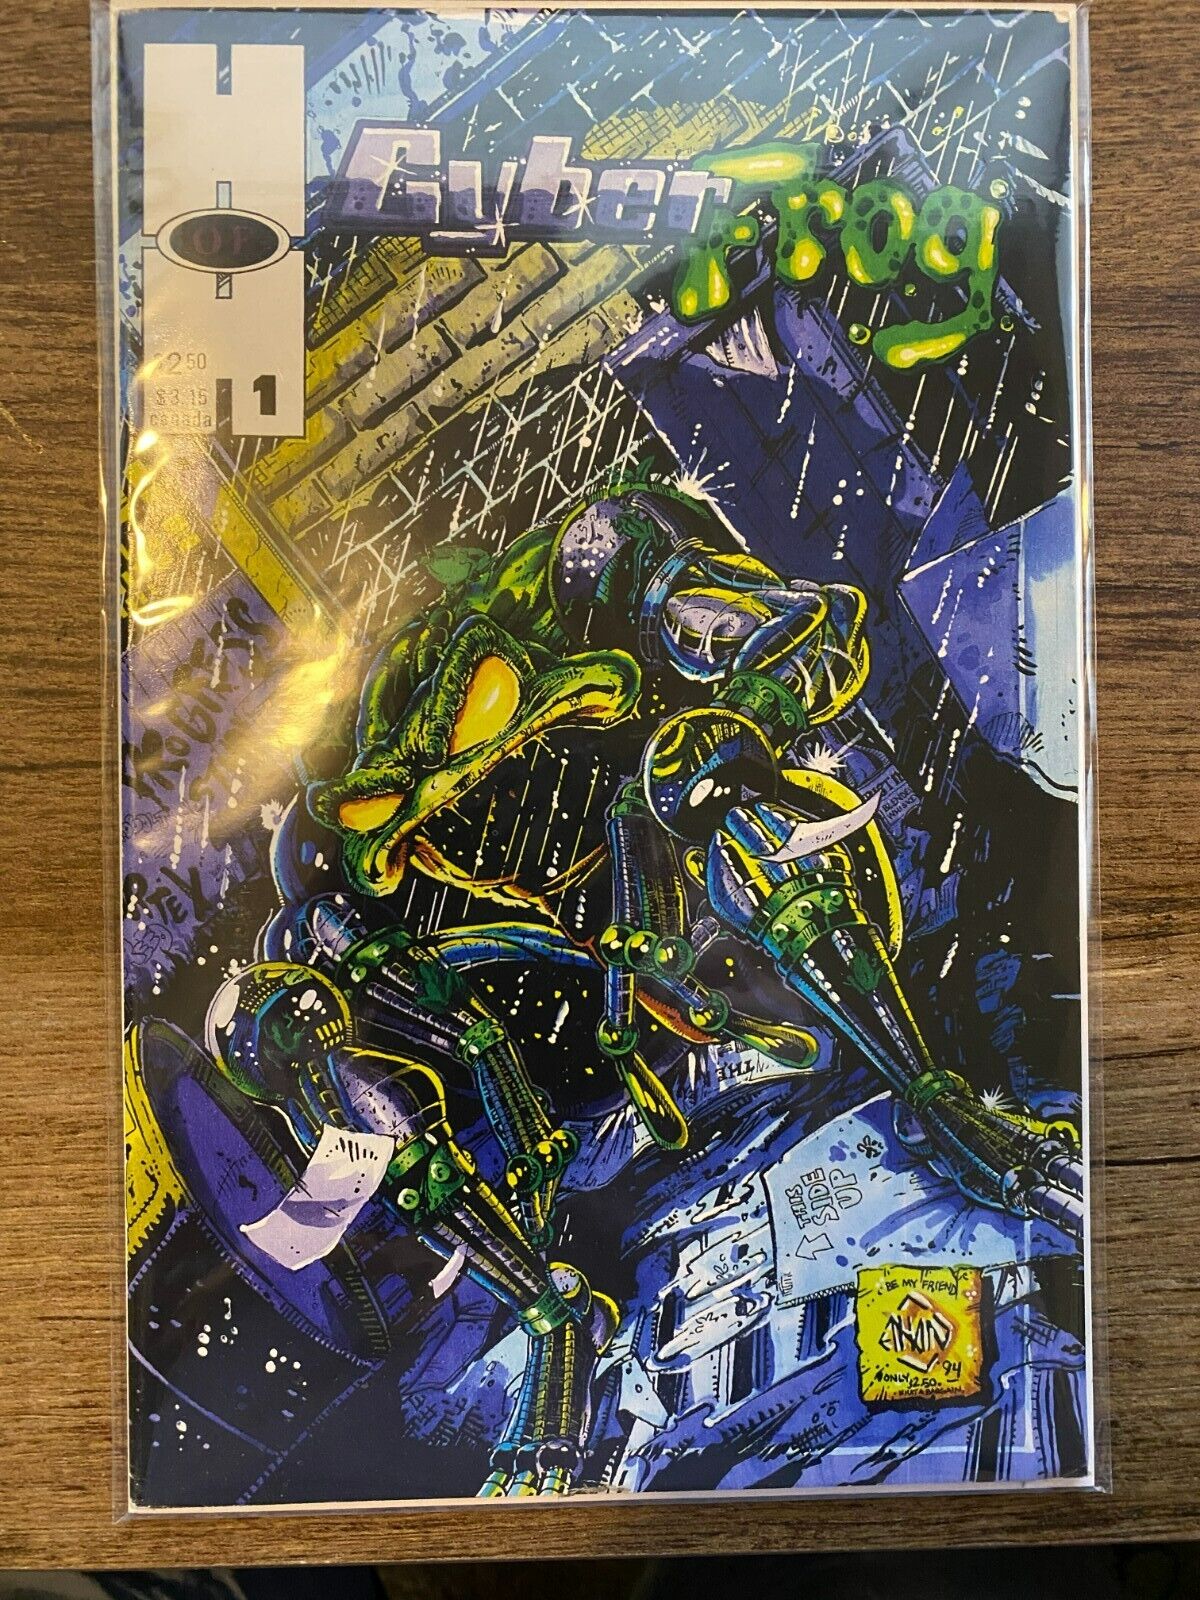 CyberFrog 1-1994 -Hall of Heroes-1st Published Work Ethan Van Scive First Print